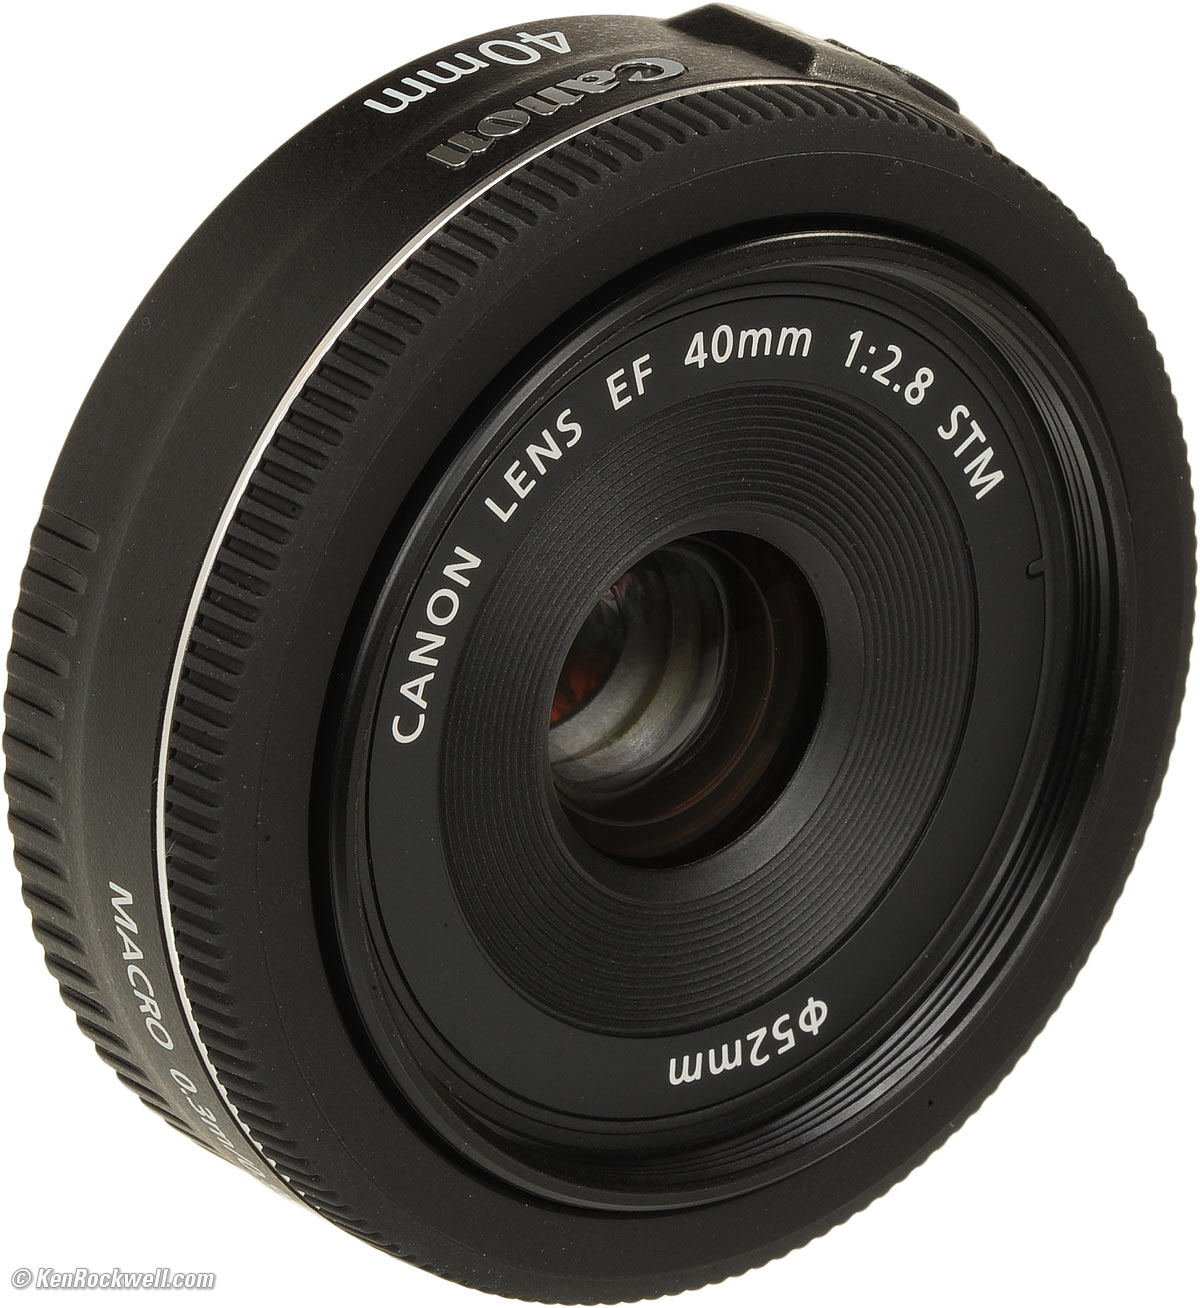 Canon 40mm f/2.8 STM Review